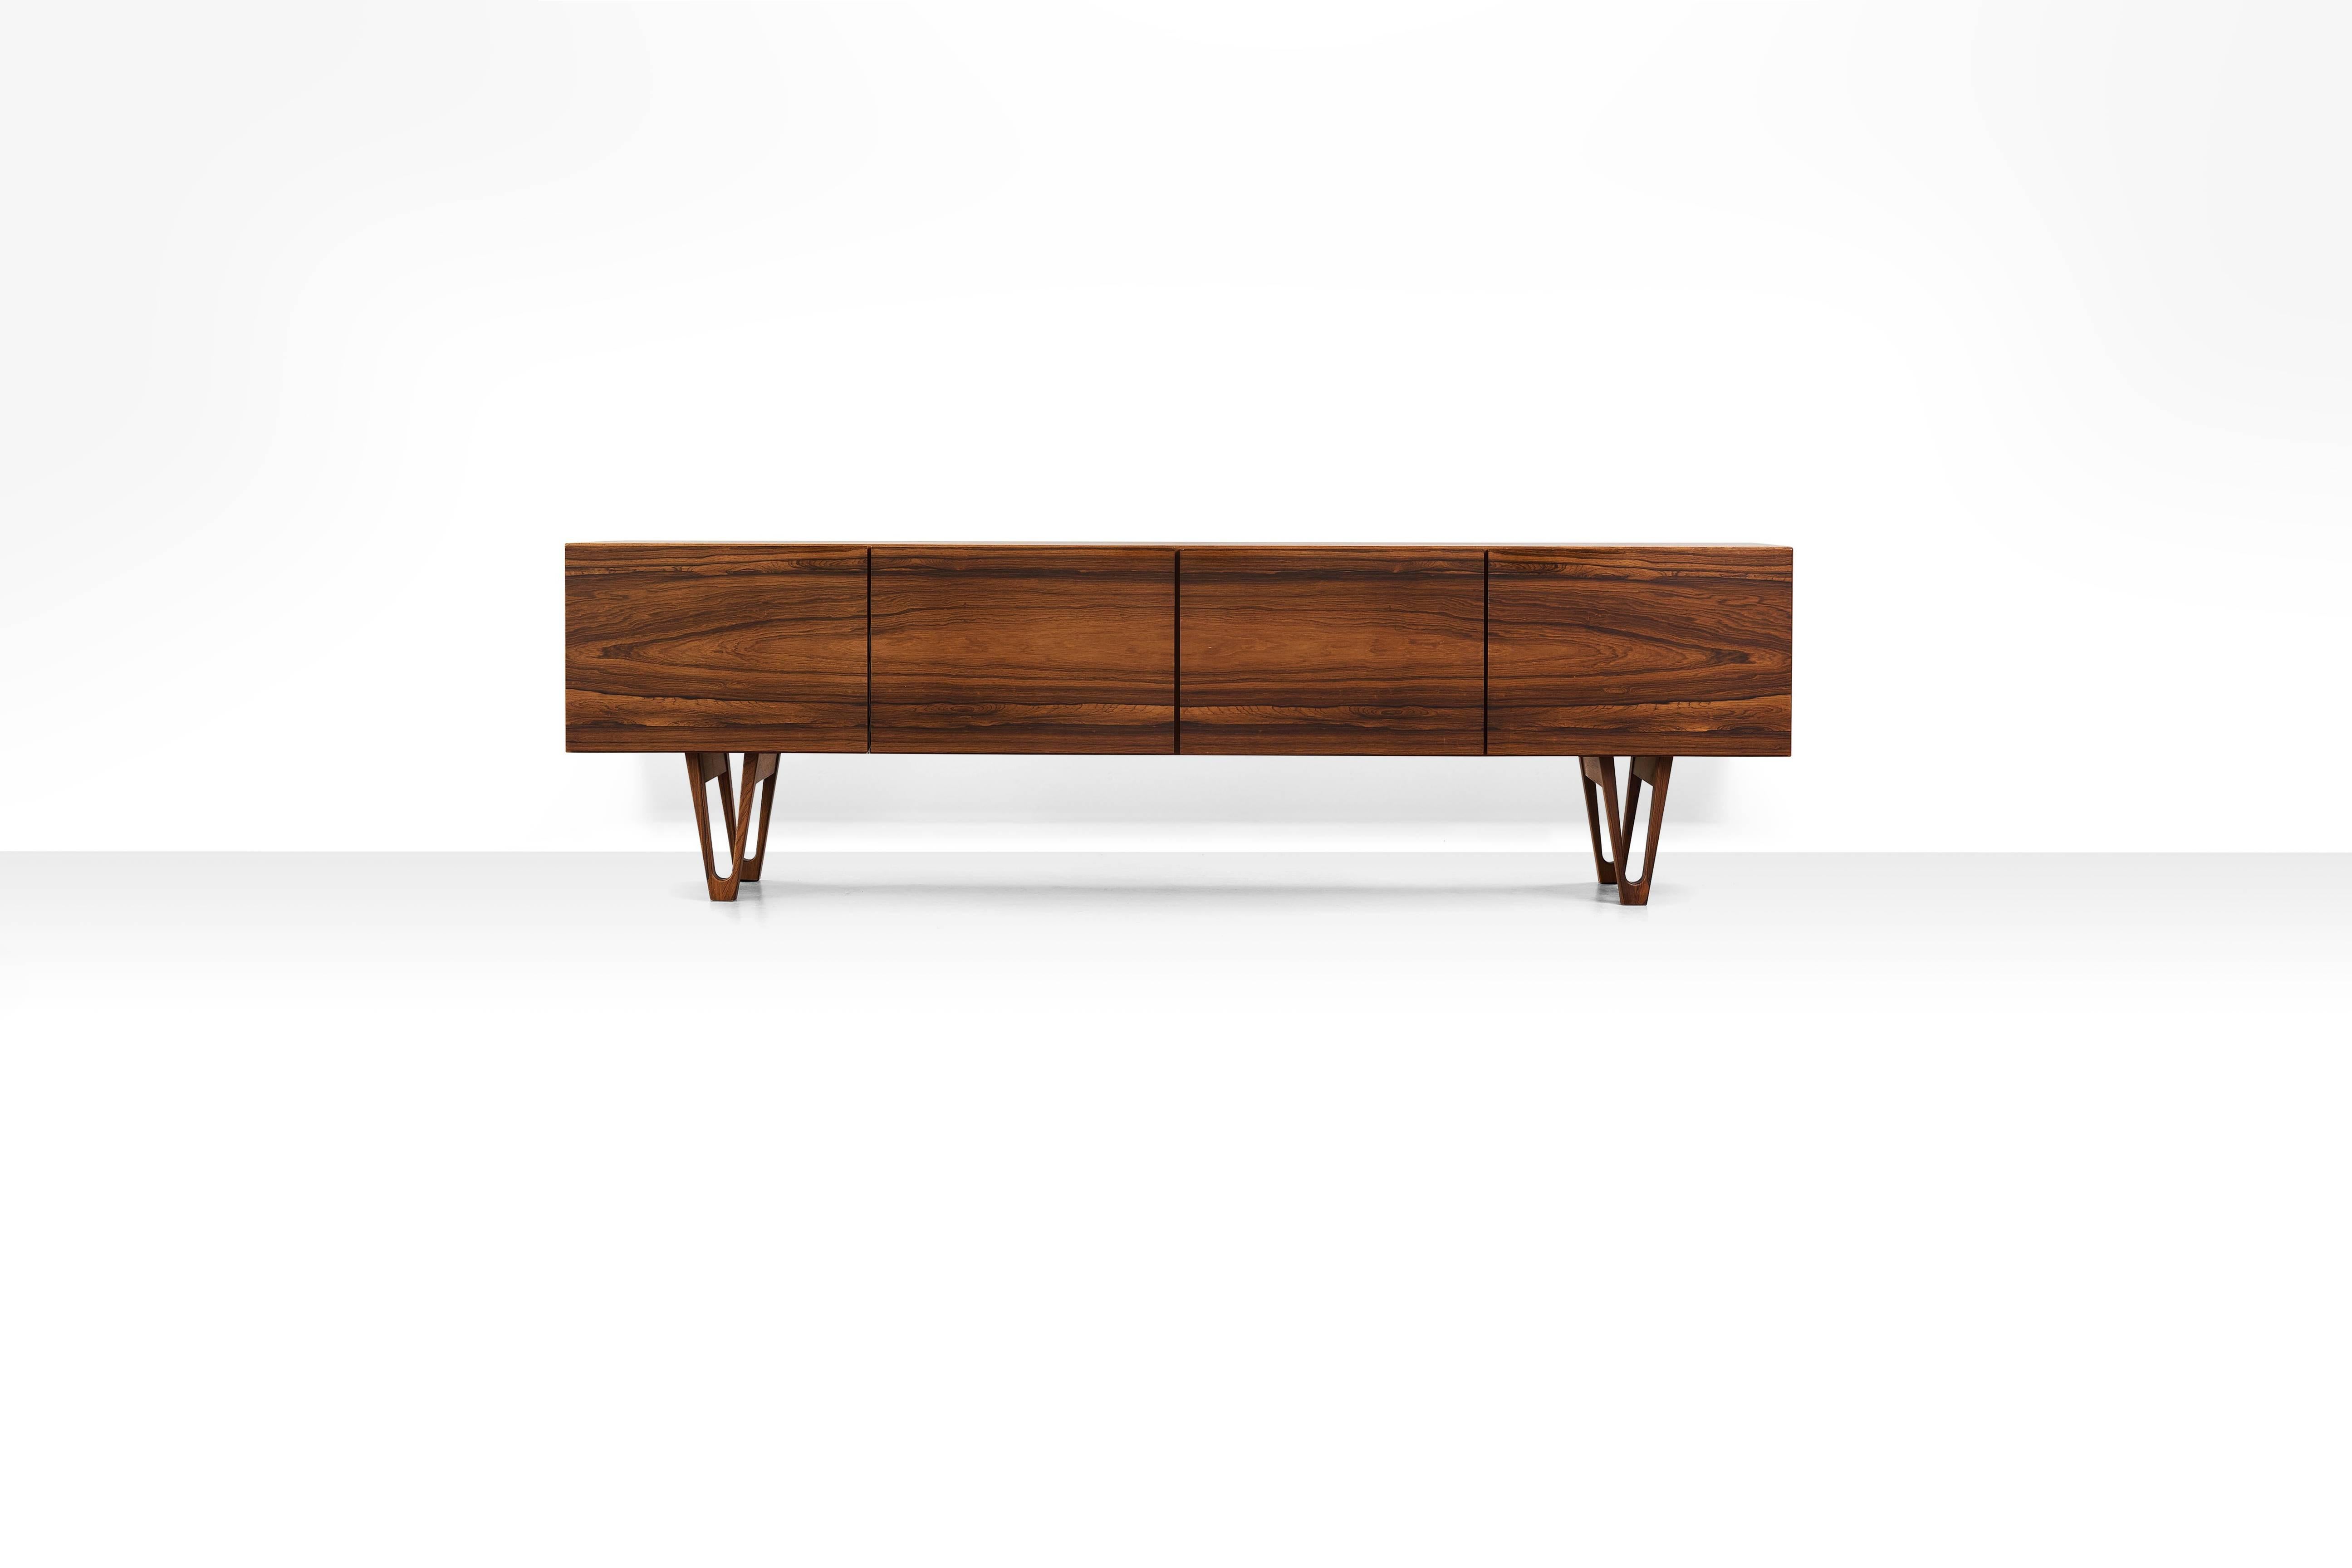 Mid-Century 'Trol' Sideboard in Rosewood by Ib Kofod-Larsen for Säffle Möbelfabrik, Sweden 1958

This very sought after model with it’s V-shaped legs is a truly timeless piece and looks remarkably modern for it's age. Produced in Sweden by the